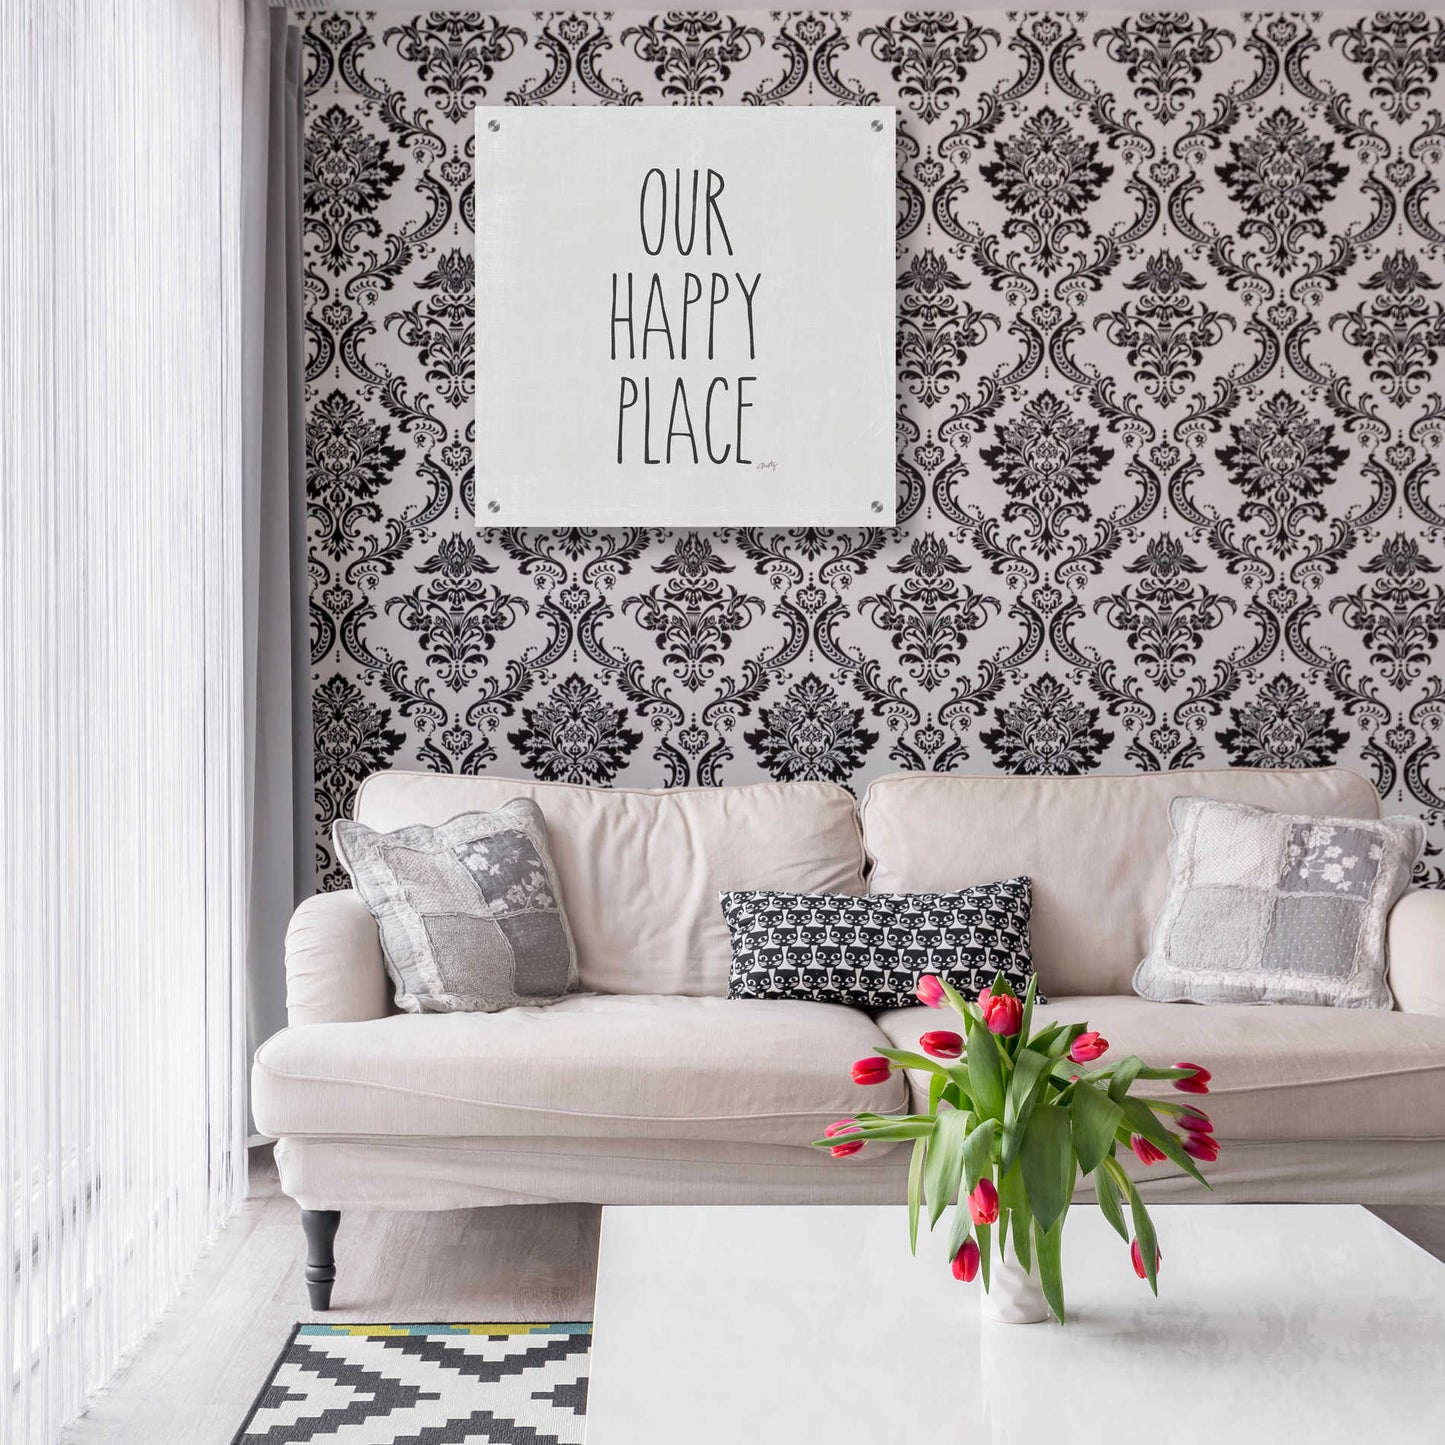 Epic Art 'Our Happy Place' by Misty Michelle, Acrylic Glass Wall Art,24x24